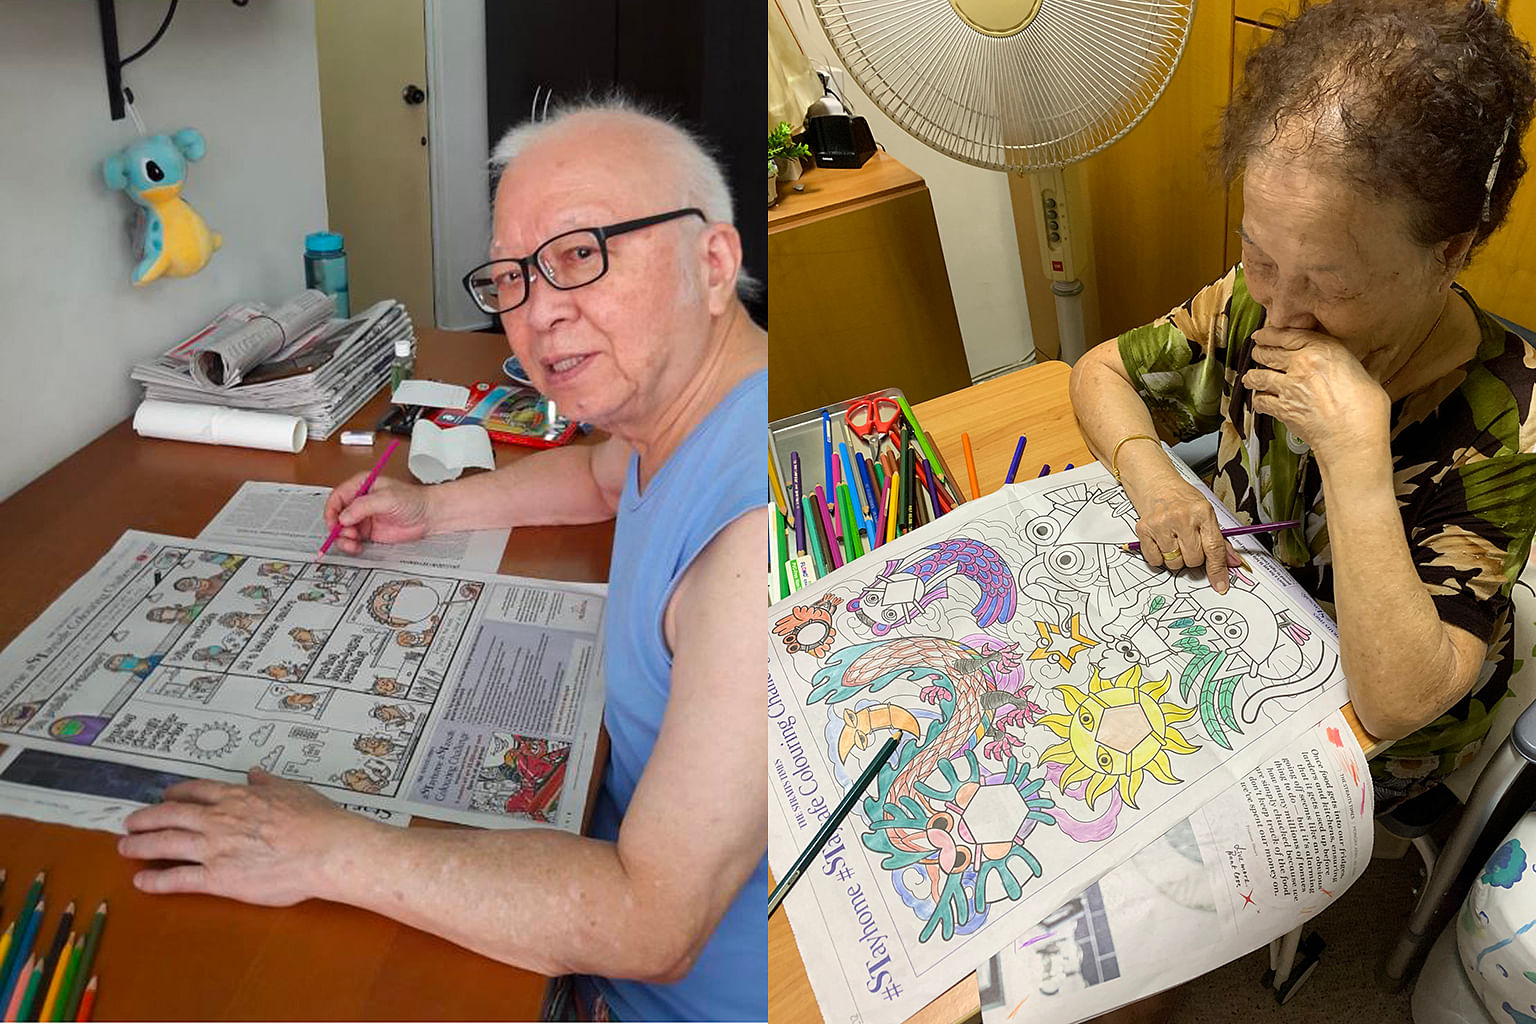 Left: Mr Chiang Yok Wah plans to use the prize money to pay the rent of his acupuncture clinic. Right: Madam Lim Siang Keng picked up the hobby of colouring through taking part in the contest. 